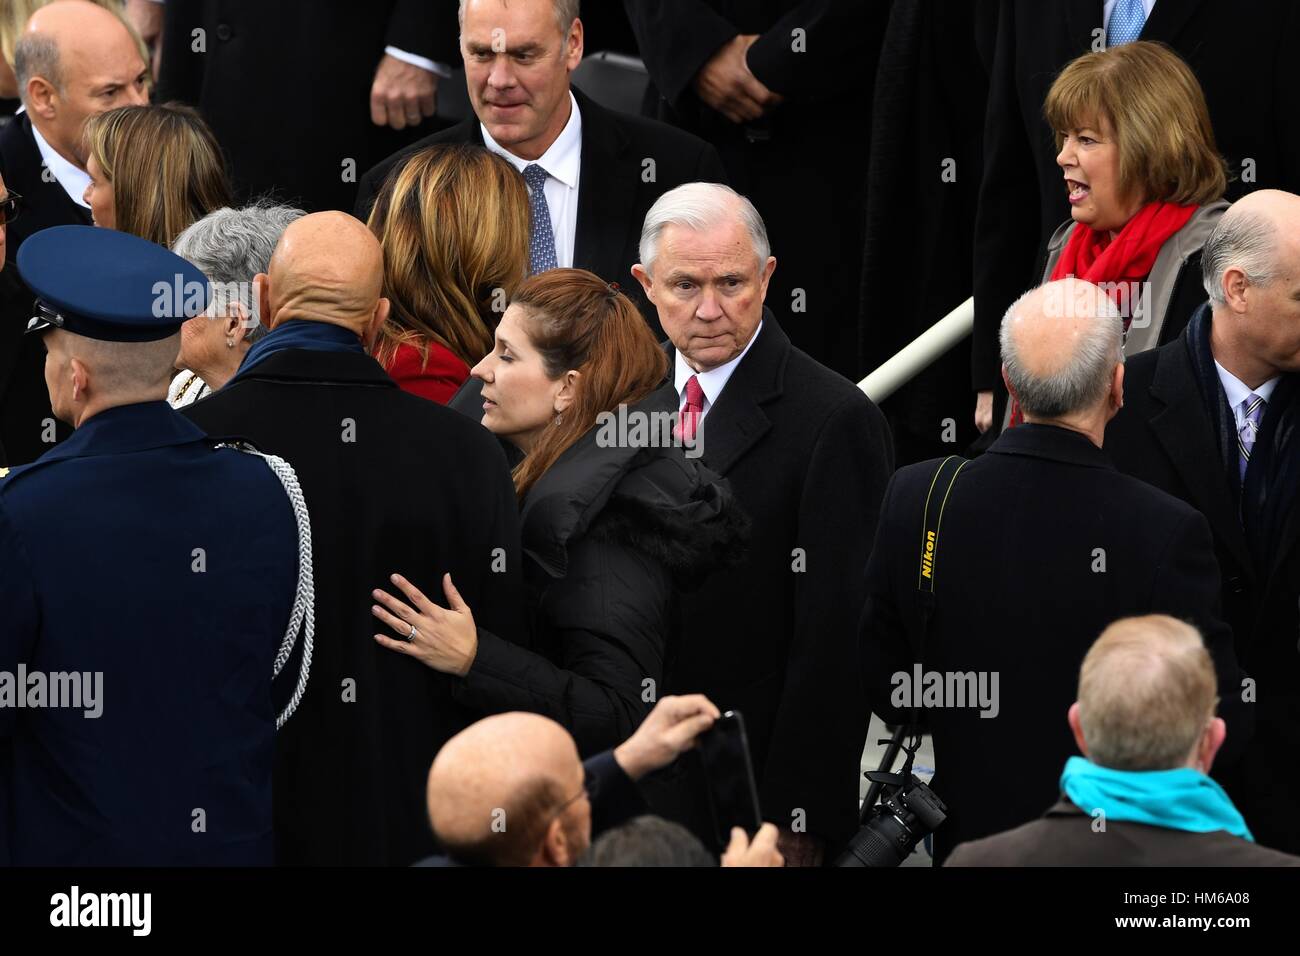 Attorney General nominee Jeff Sessions arrives for the 68th President Inaugural Ceremony of President Donald Trump on Capitol Hill January 20, 2017 in Washington, DC. Stock Photo